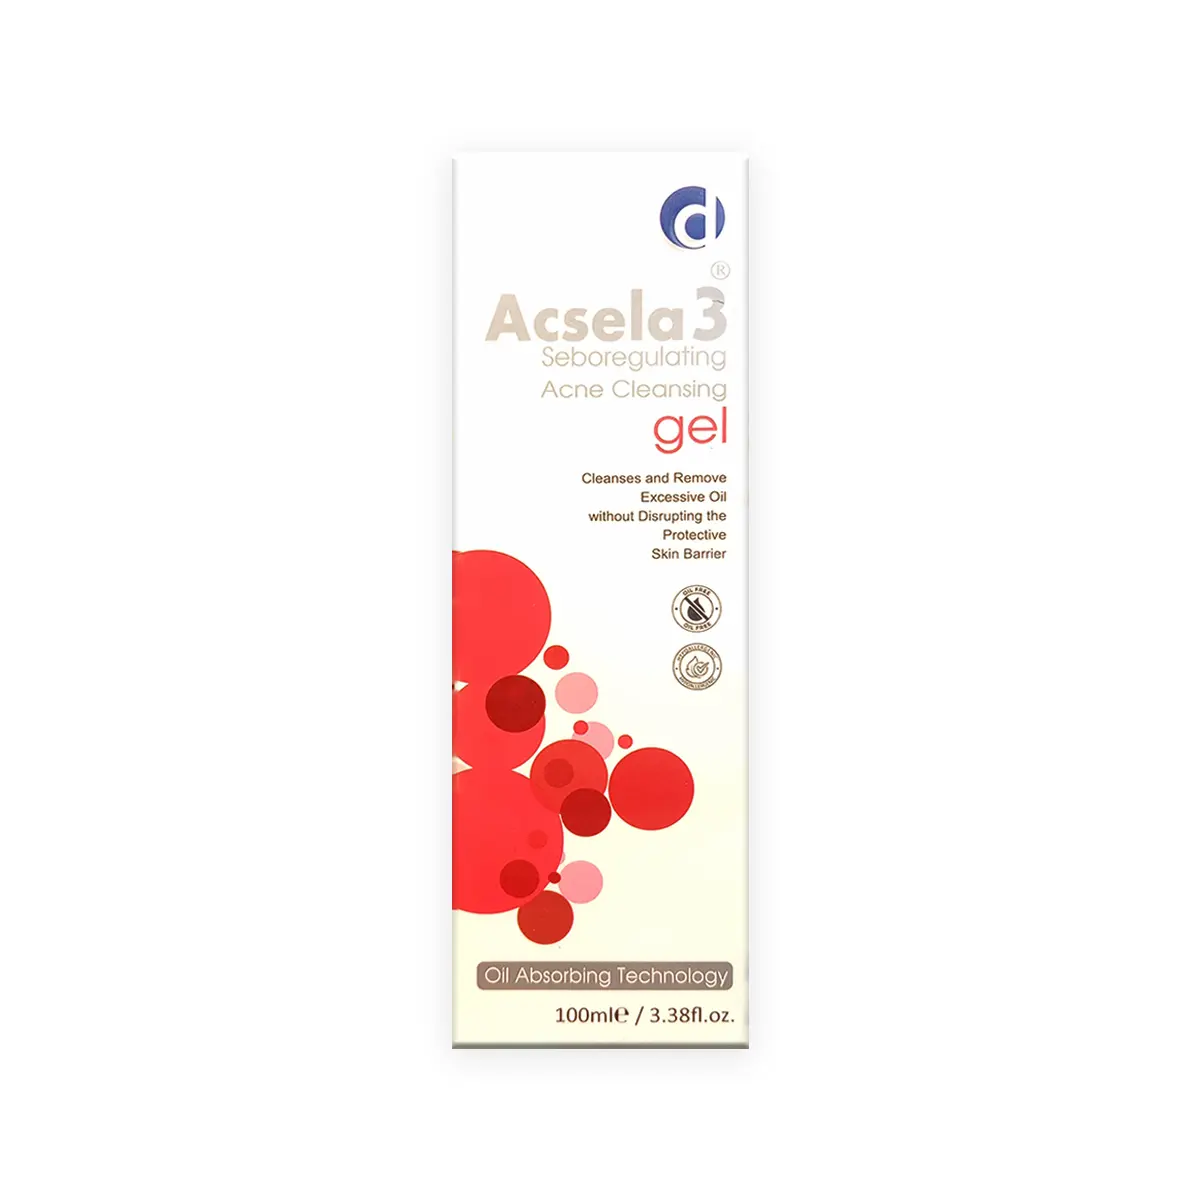 First product image of Acsela 3 Seboregulating Acne Cleansing Gel 100ml